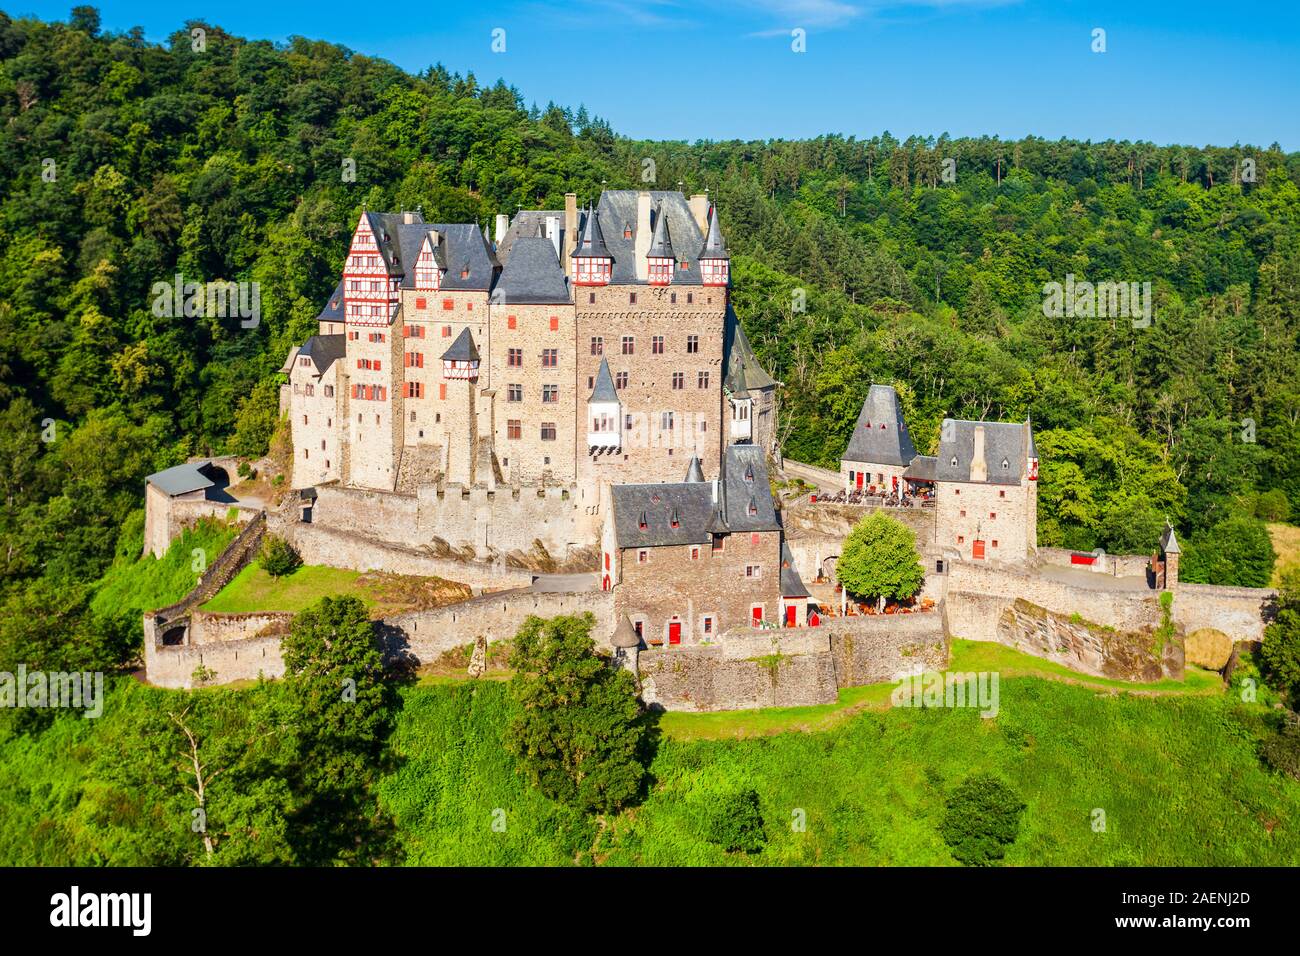 Eltz Castle Or Burg Eltz Is A Medieval Castle In The Hills Above The Moselle River Near Koblenz In Germany Stock Photo Alamy